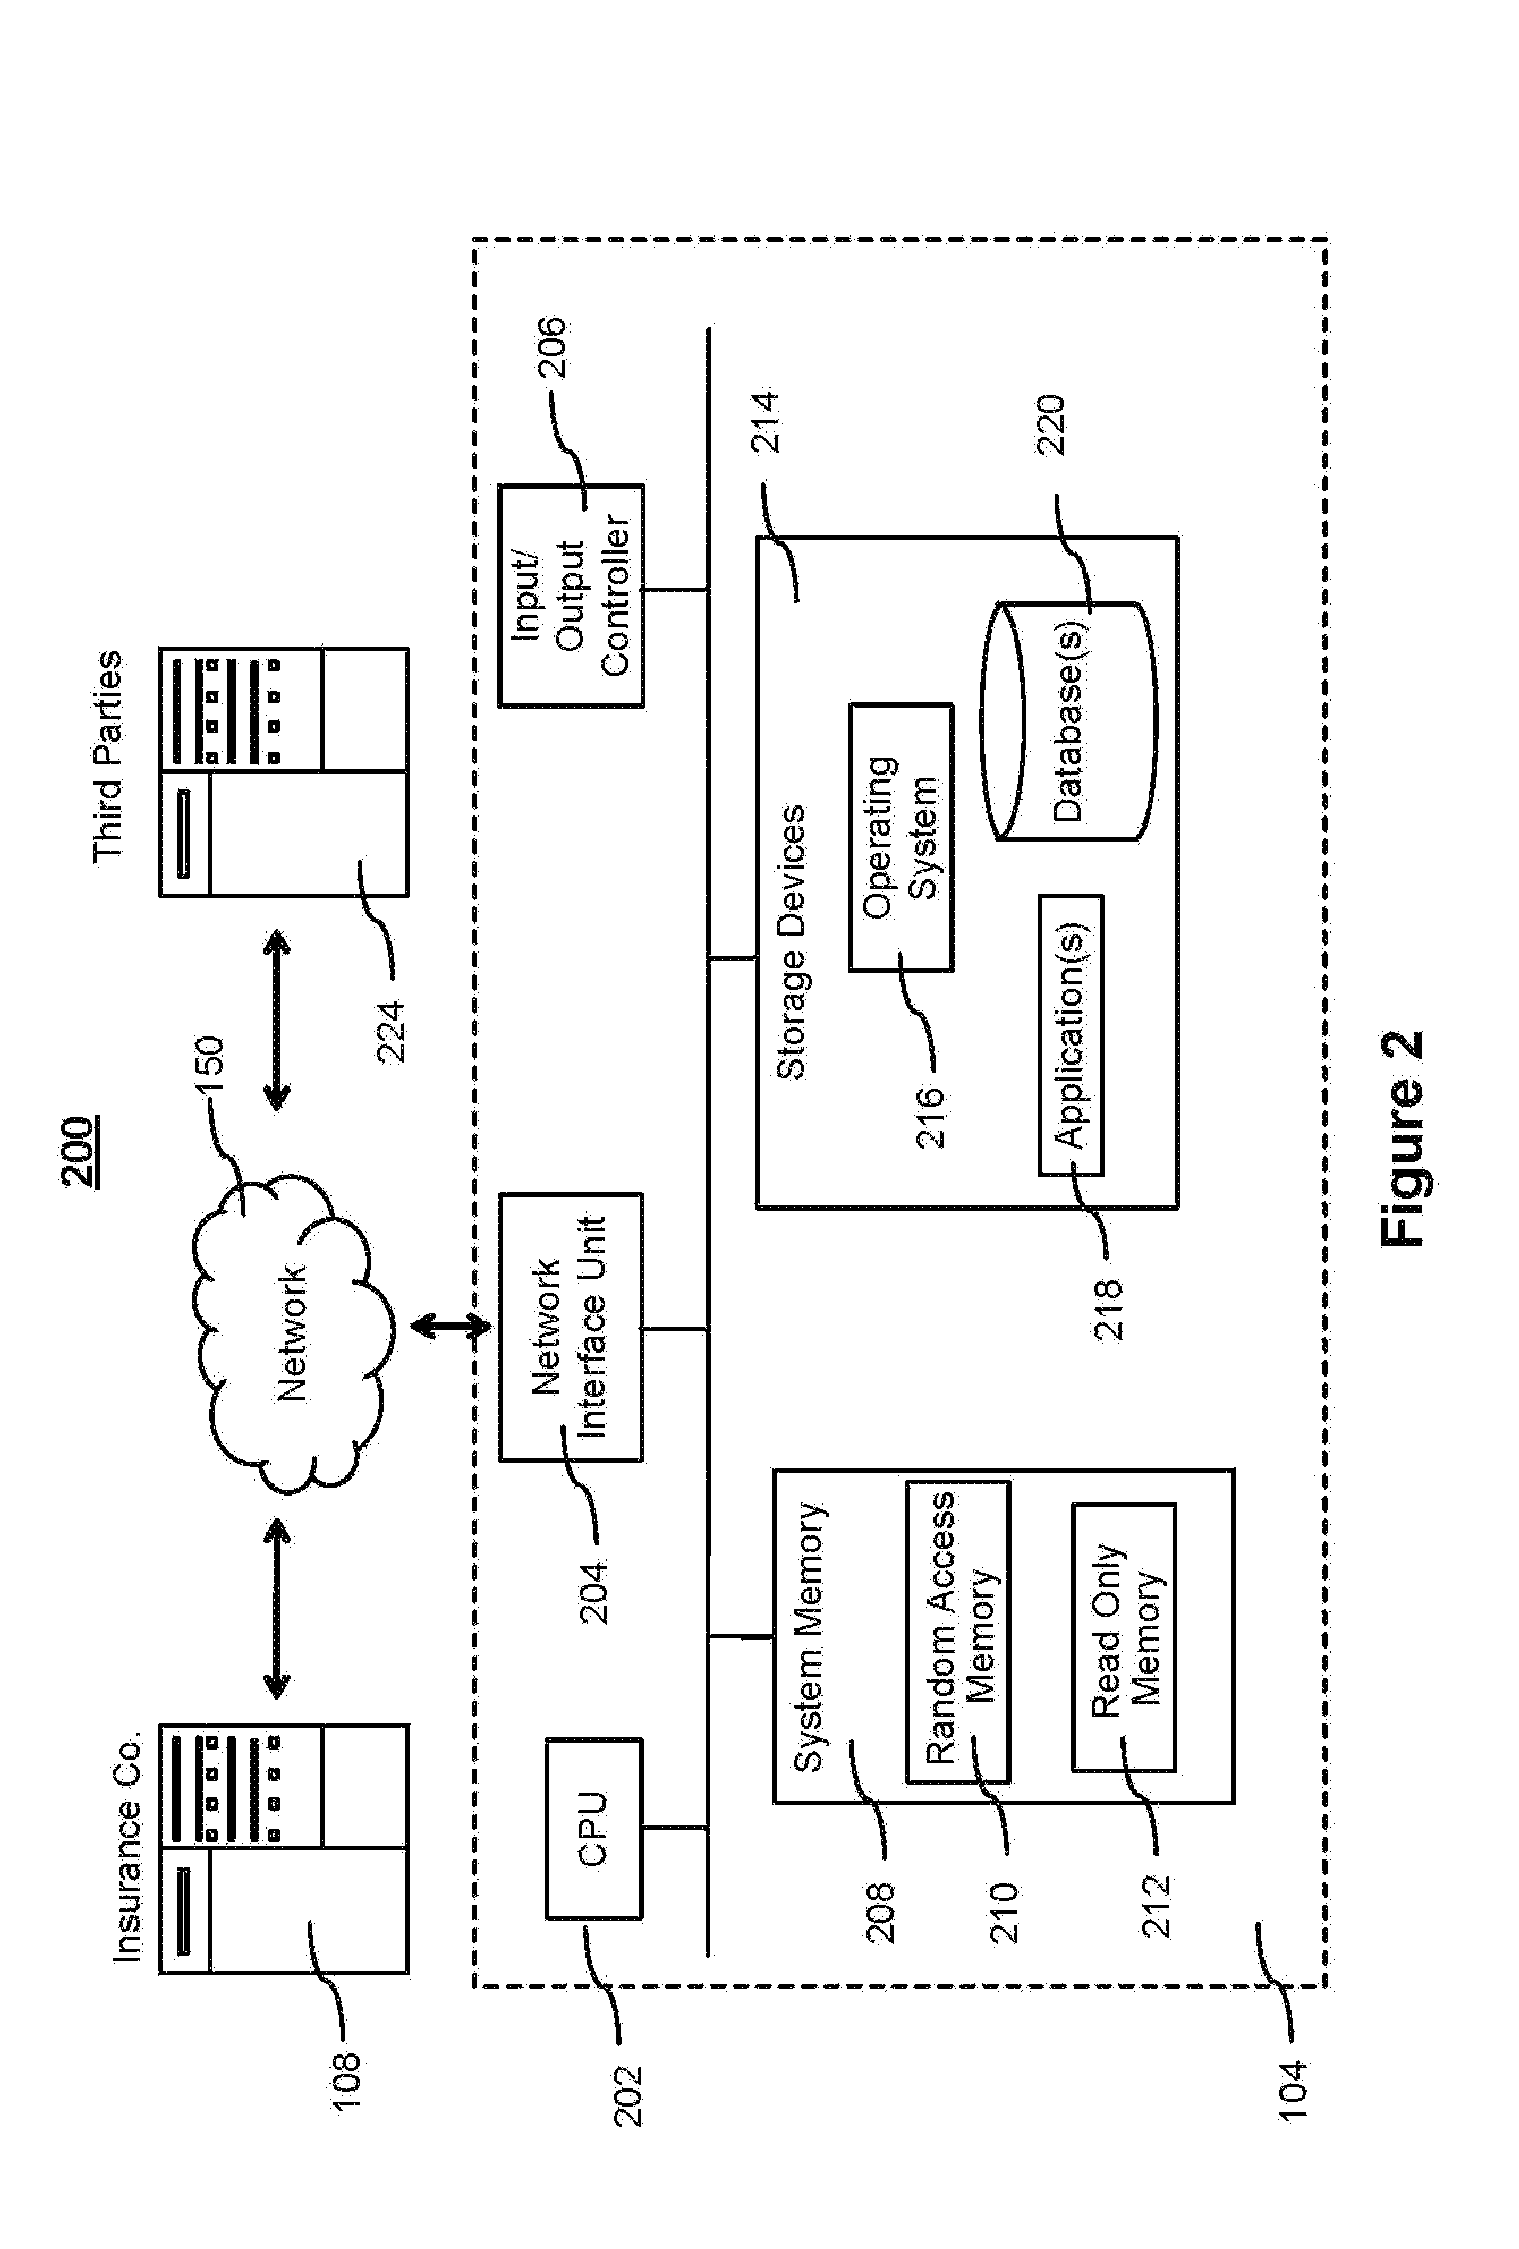 System and method to provide telematics data on a map display